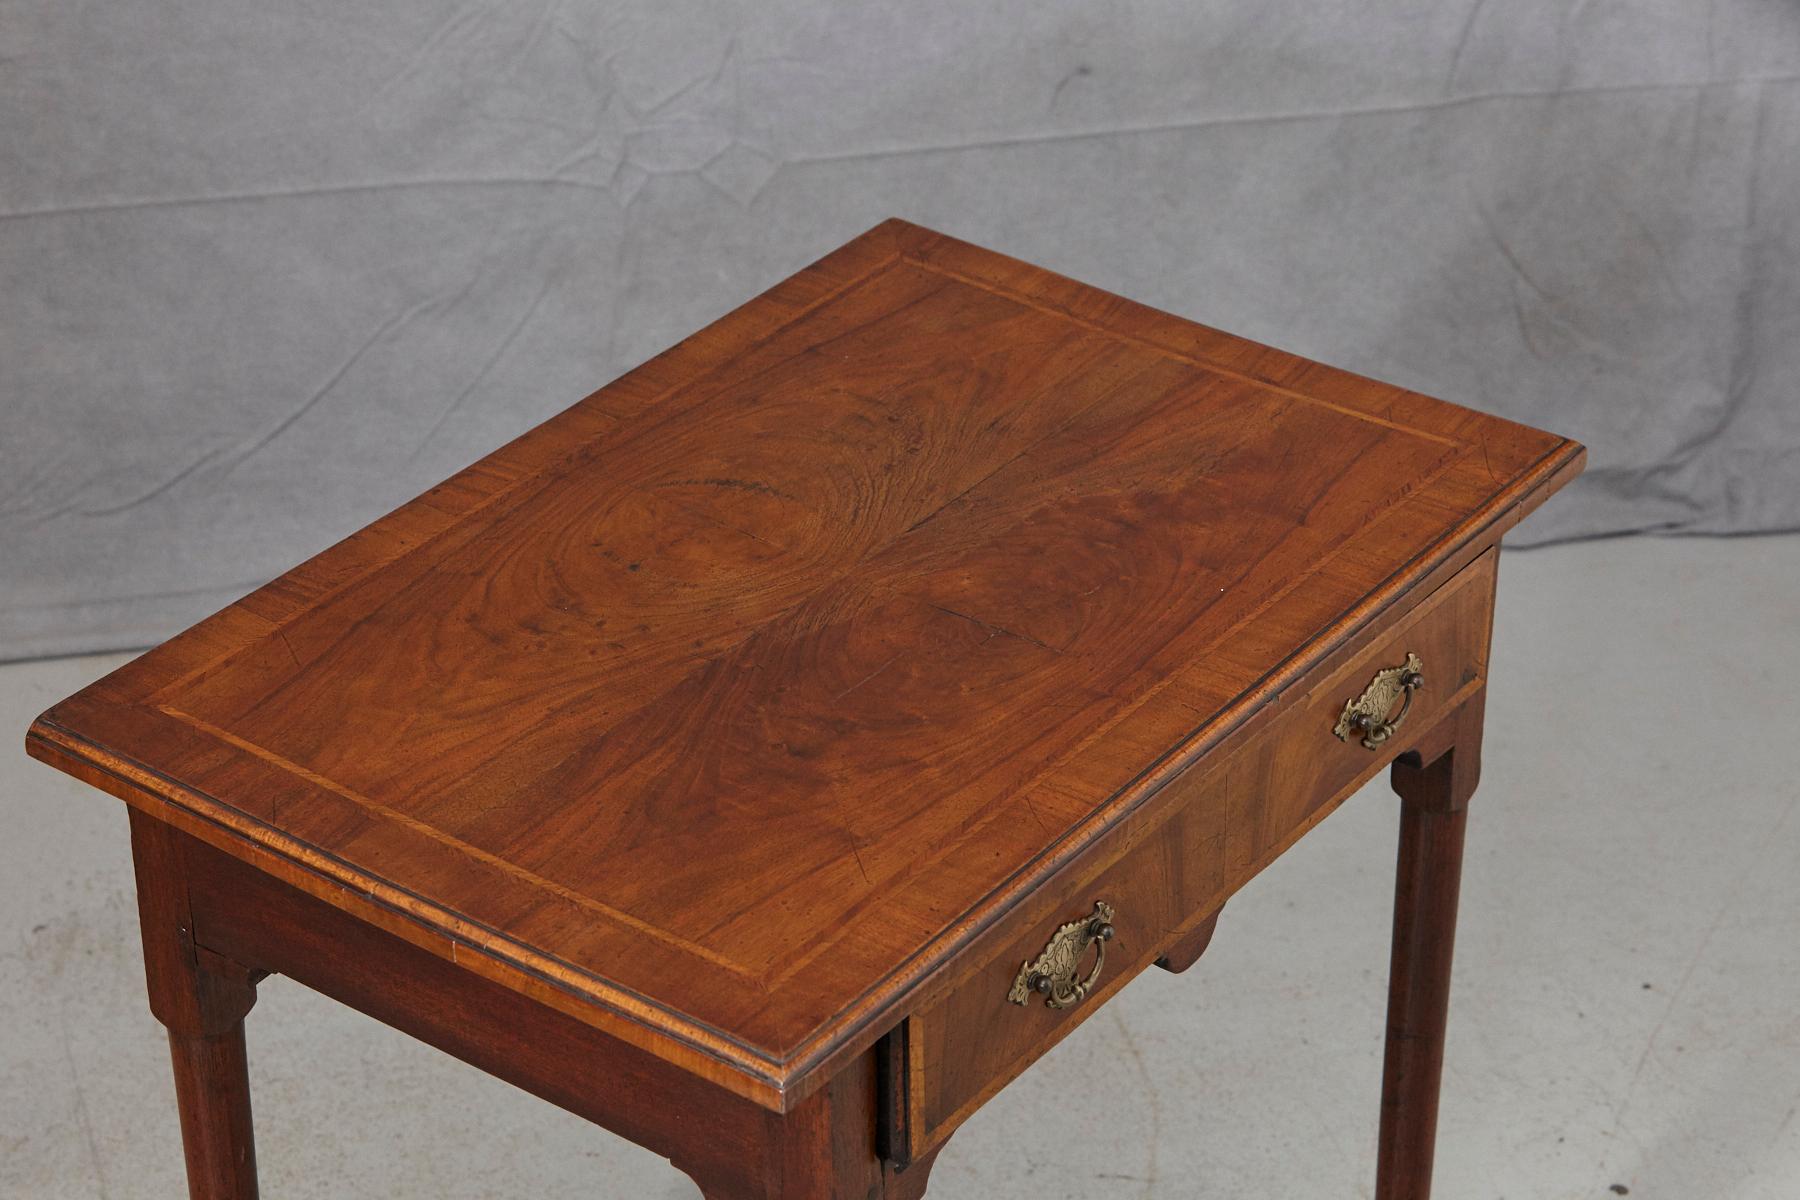 Queen Anne Style Walnut Side Table with Wood Inlays and Brass Hardware 3